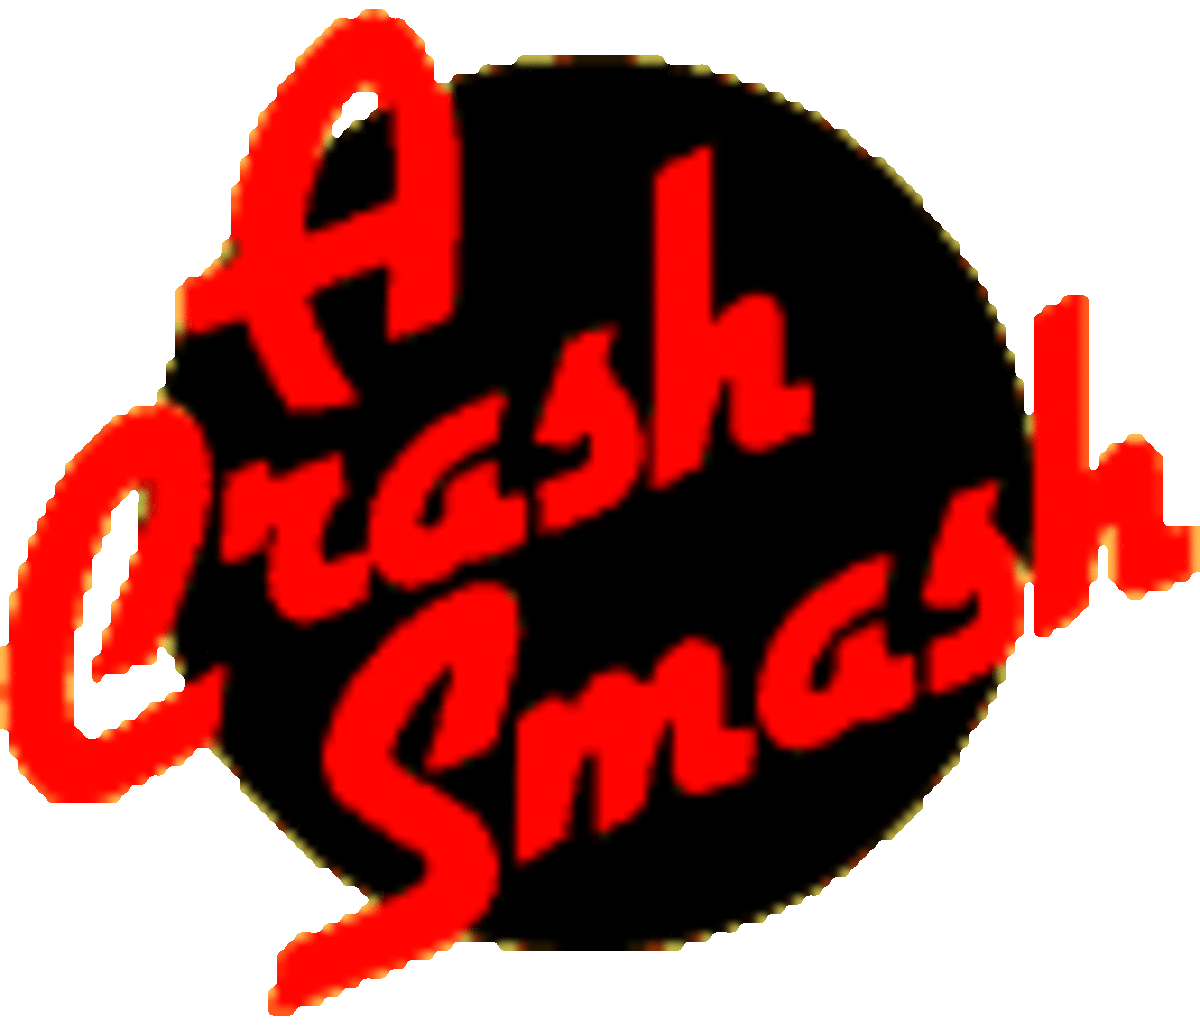 This Crash Smash logo was used up until issue 12 (January 1985)